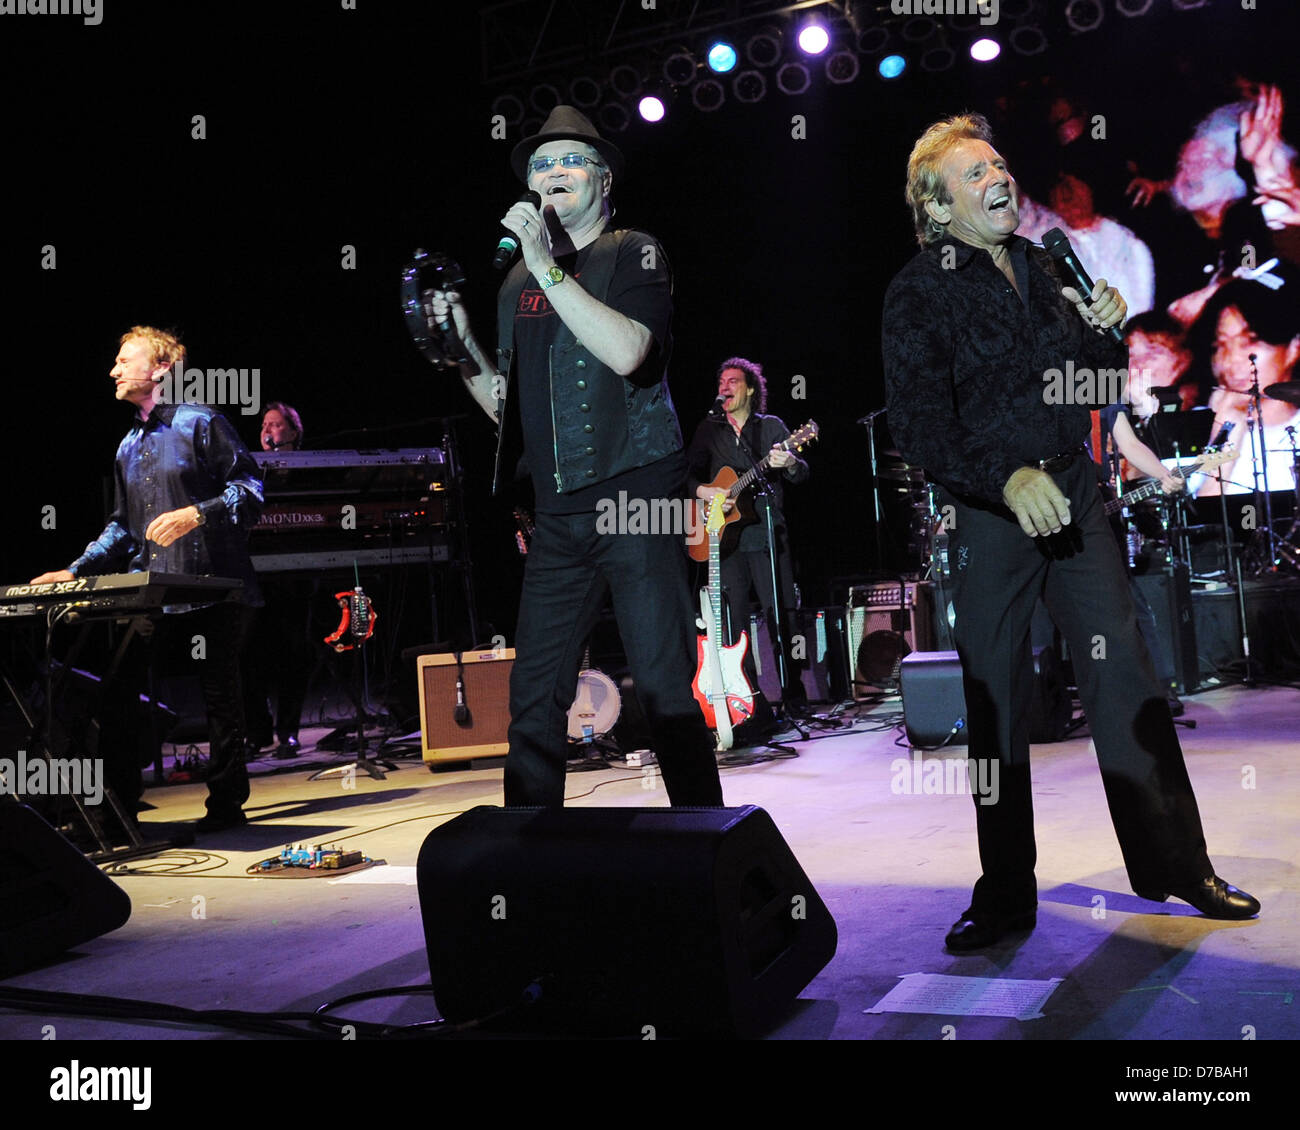 Mickey Dolenz, Davy Jones Peter Tork, Micky Dolenz and Davy Jones of the Monkees perform at the Pompano Beach Amphitheater Stock Photo